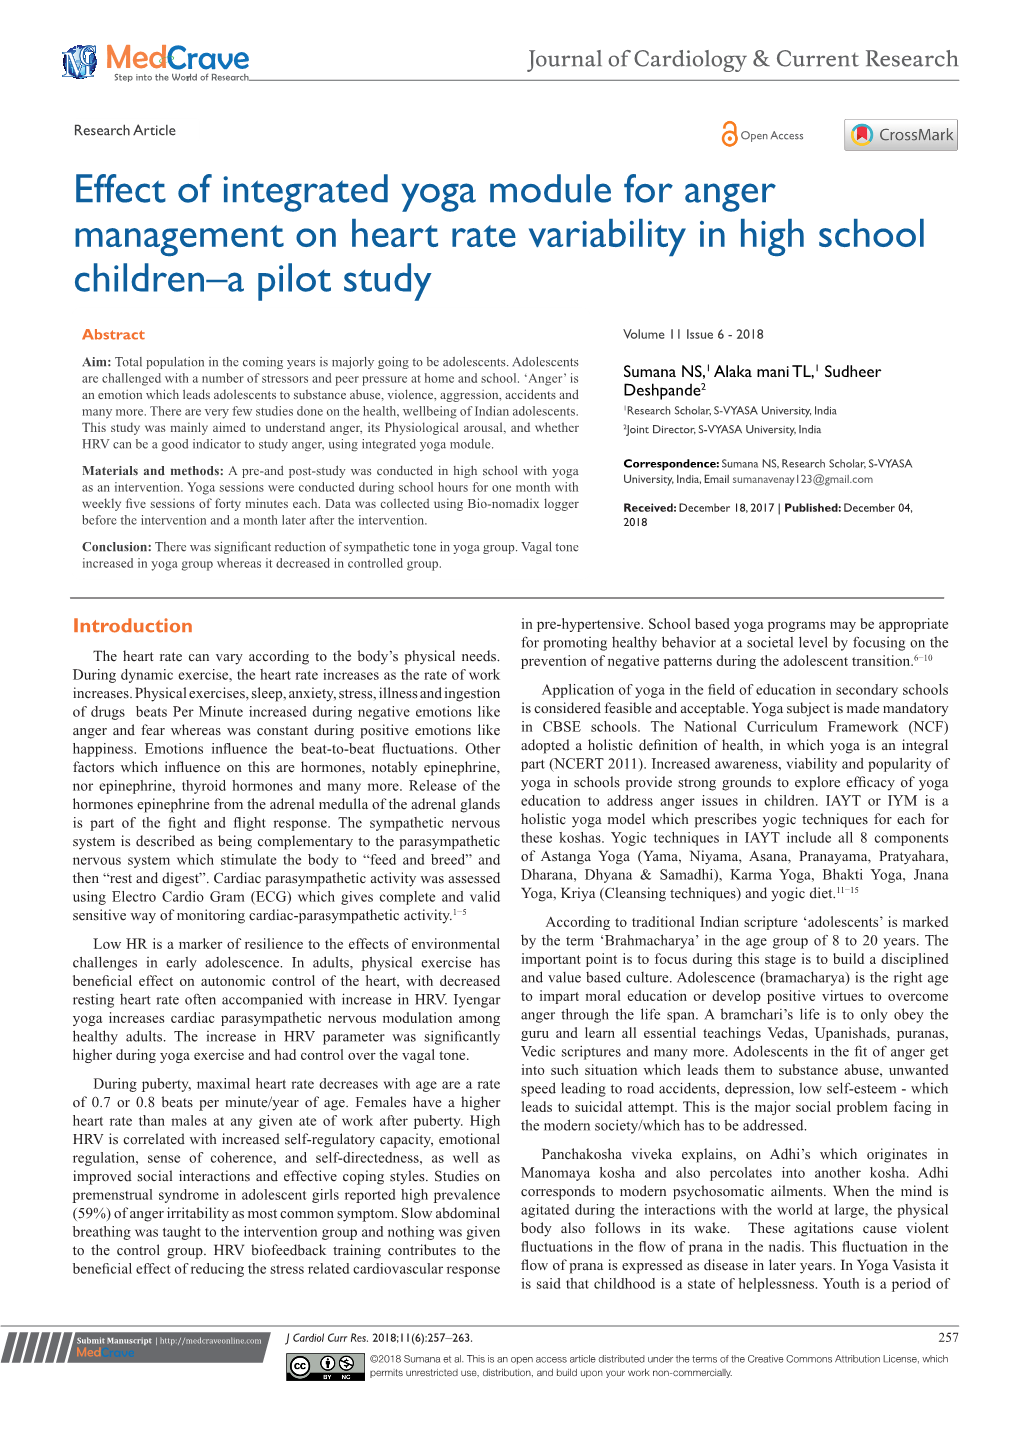 Effect of Integrated Yoga Module for Anger Management on Heart Rate Variability in High School Children–A Pilot Study